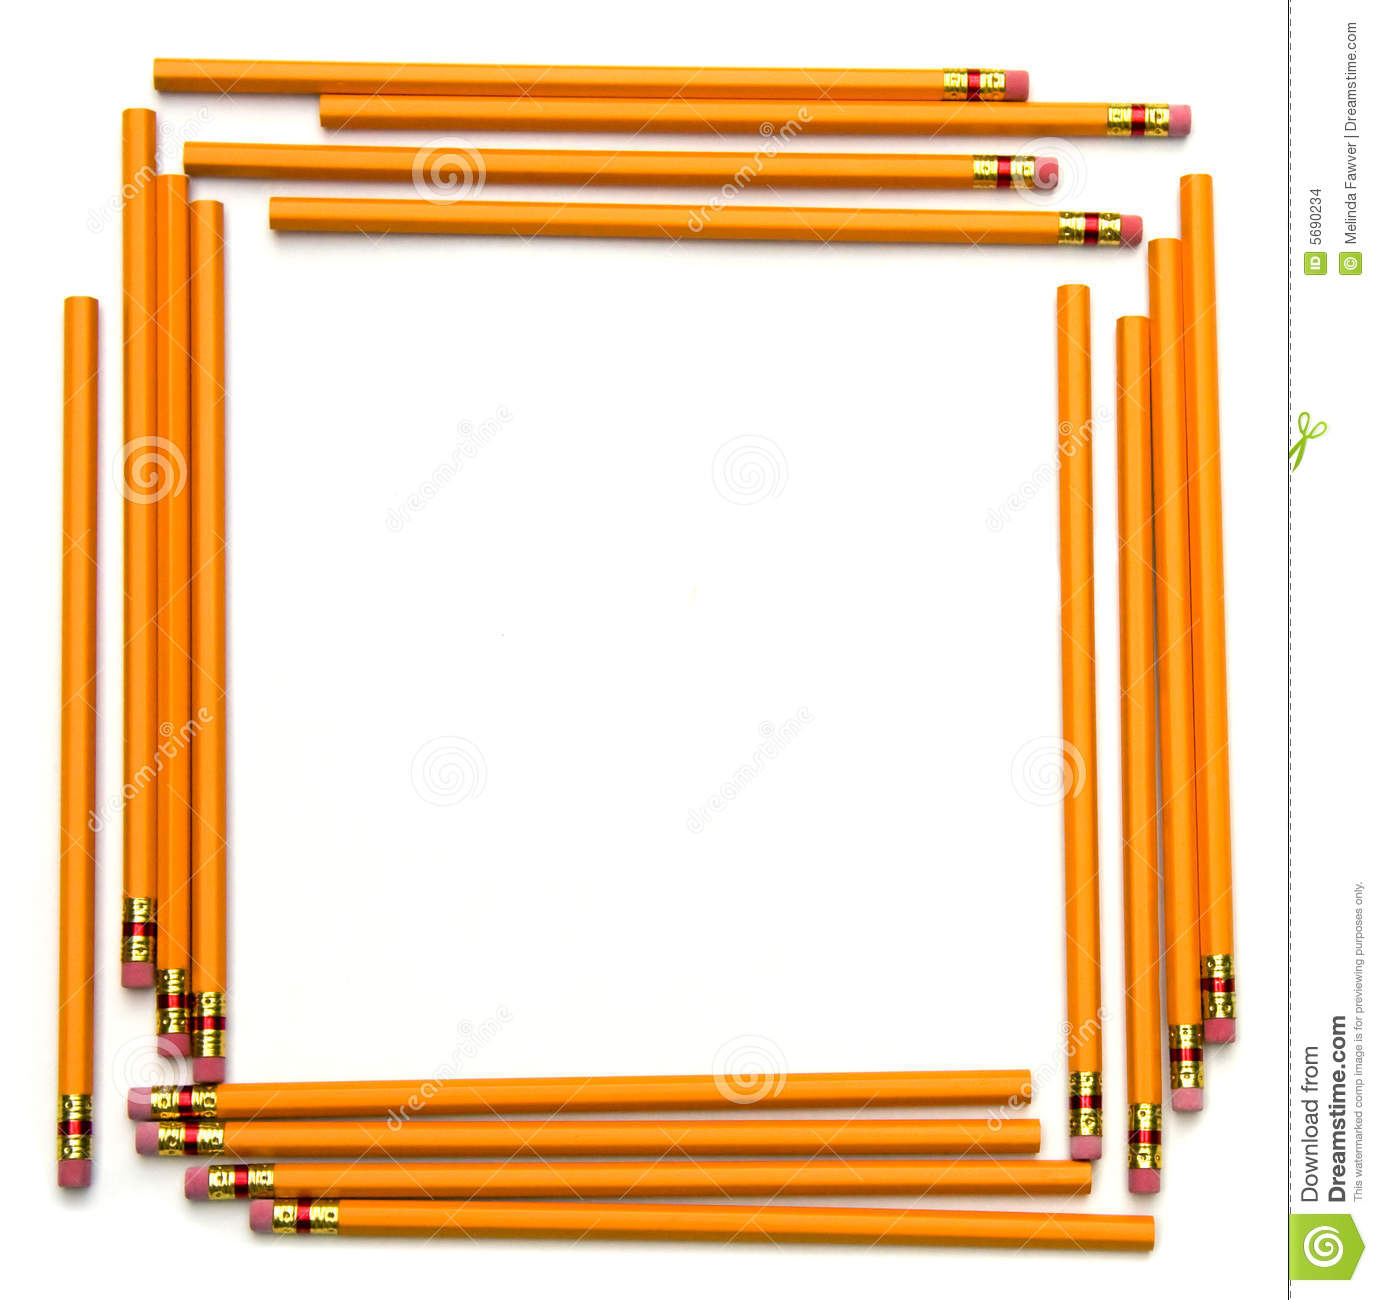 Square Frame Made Of Unsharpened Number Two Pencils For Back To School    